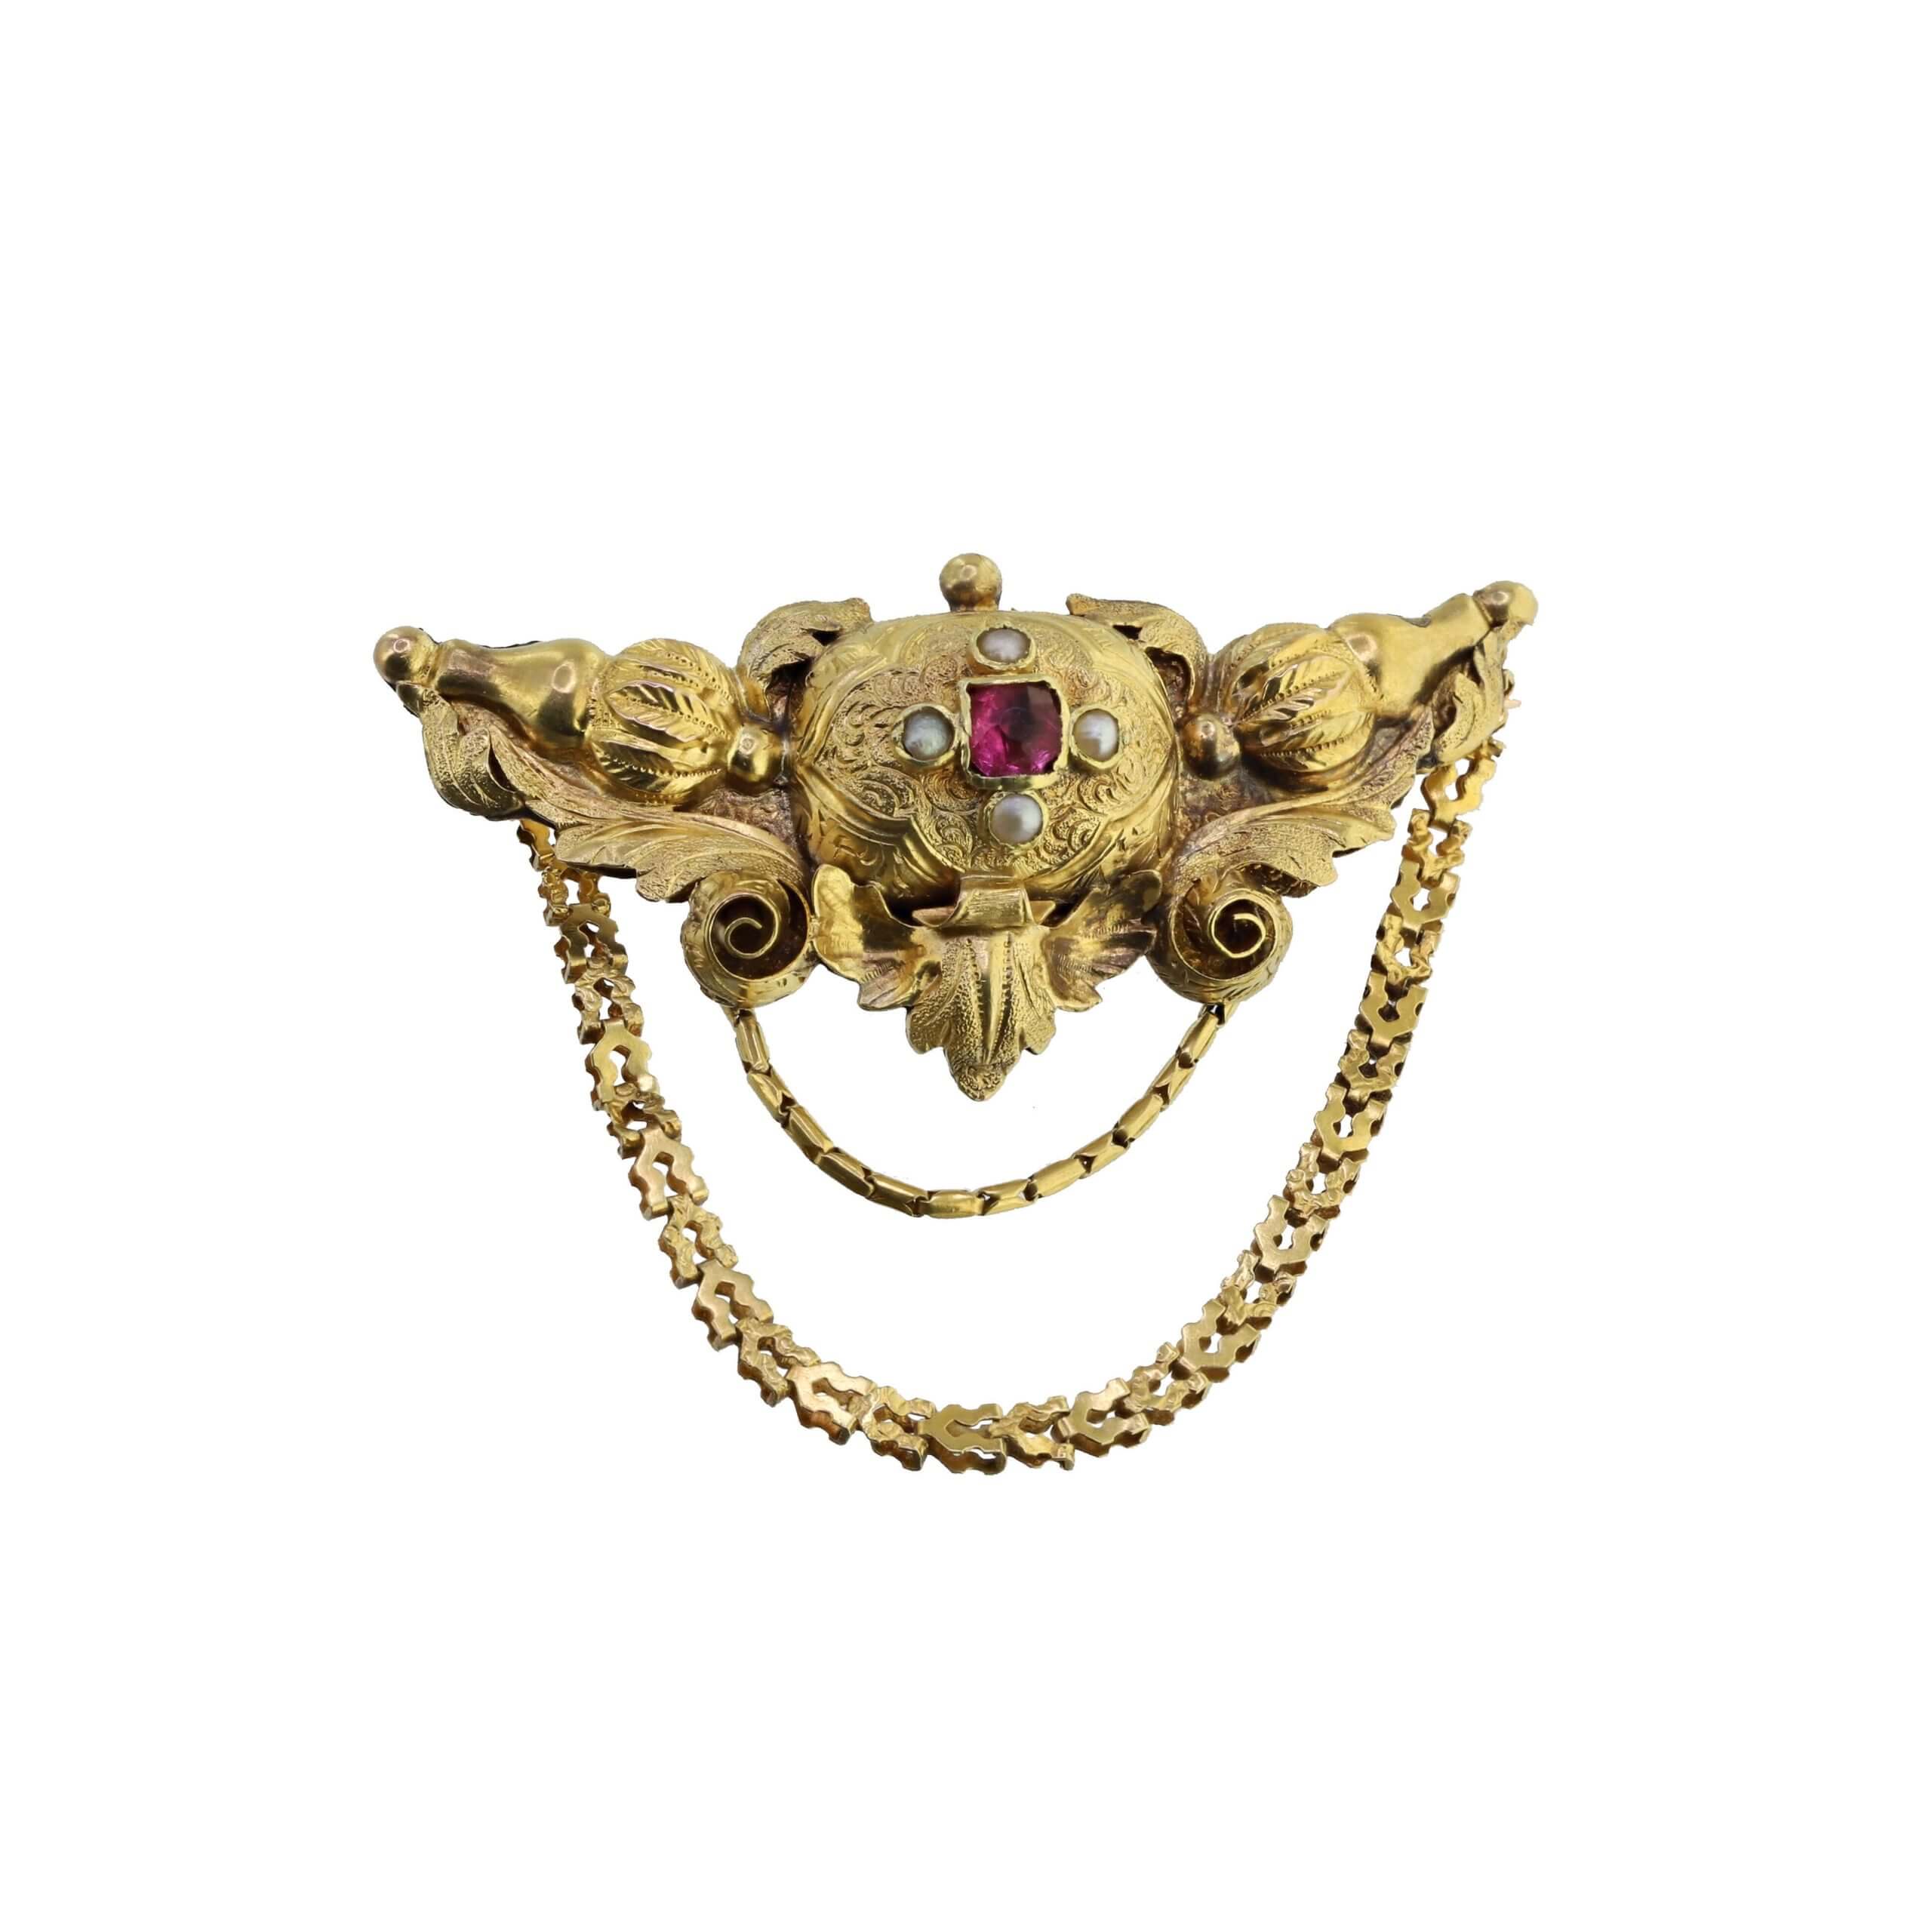 Ruby Pearl Brooch, antique around 1850